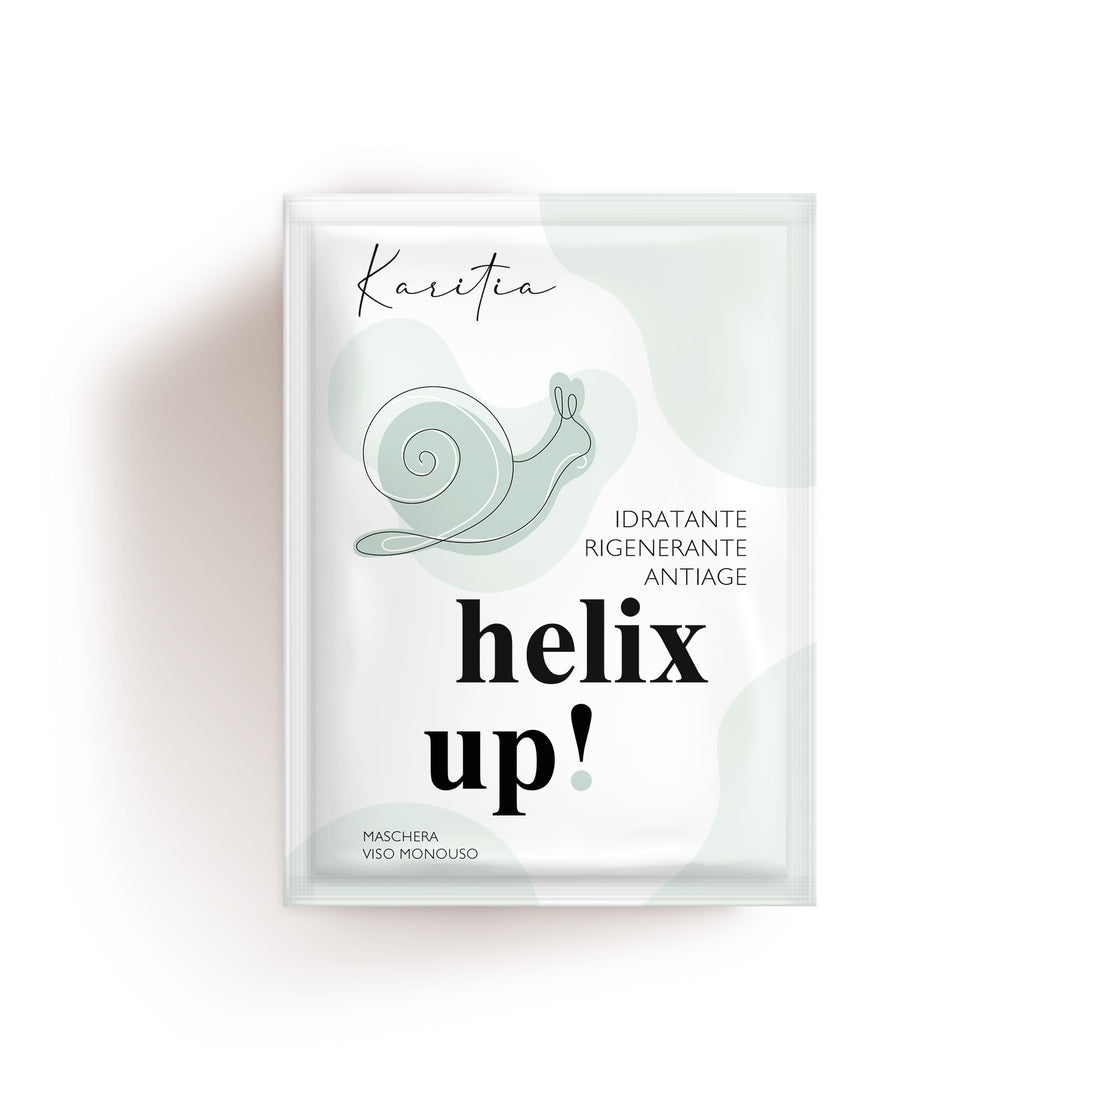 helix up!